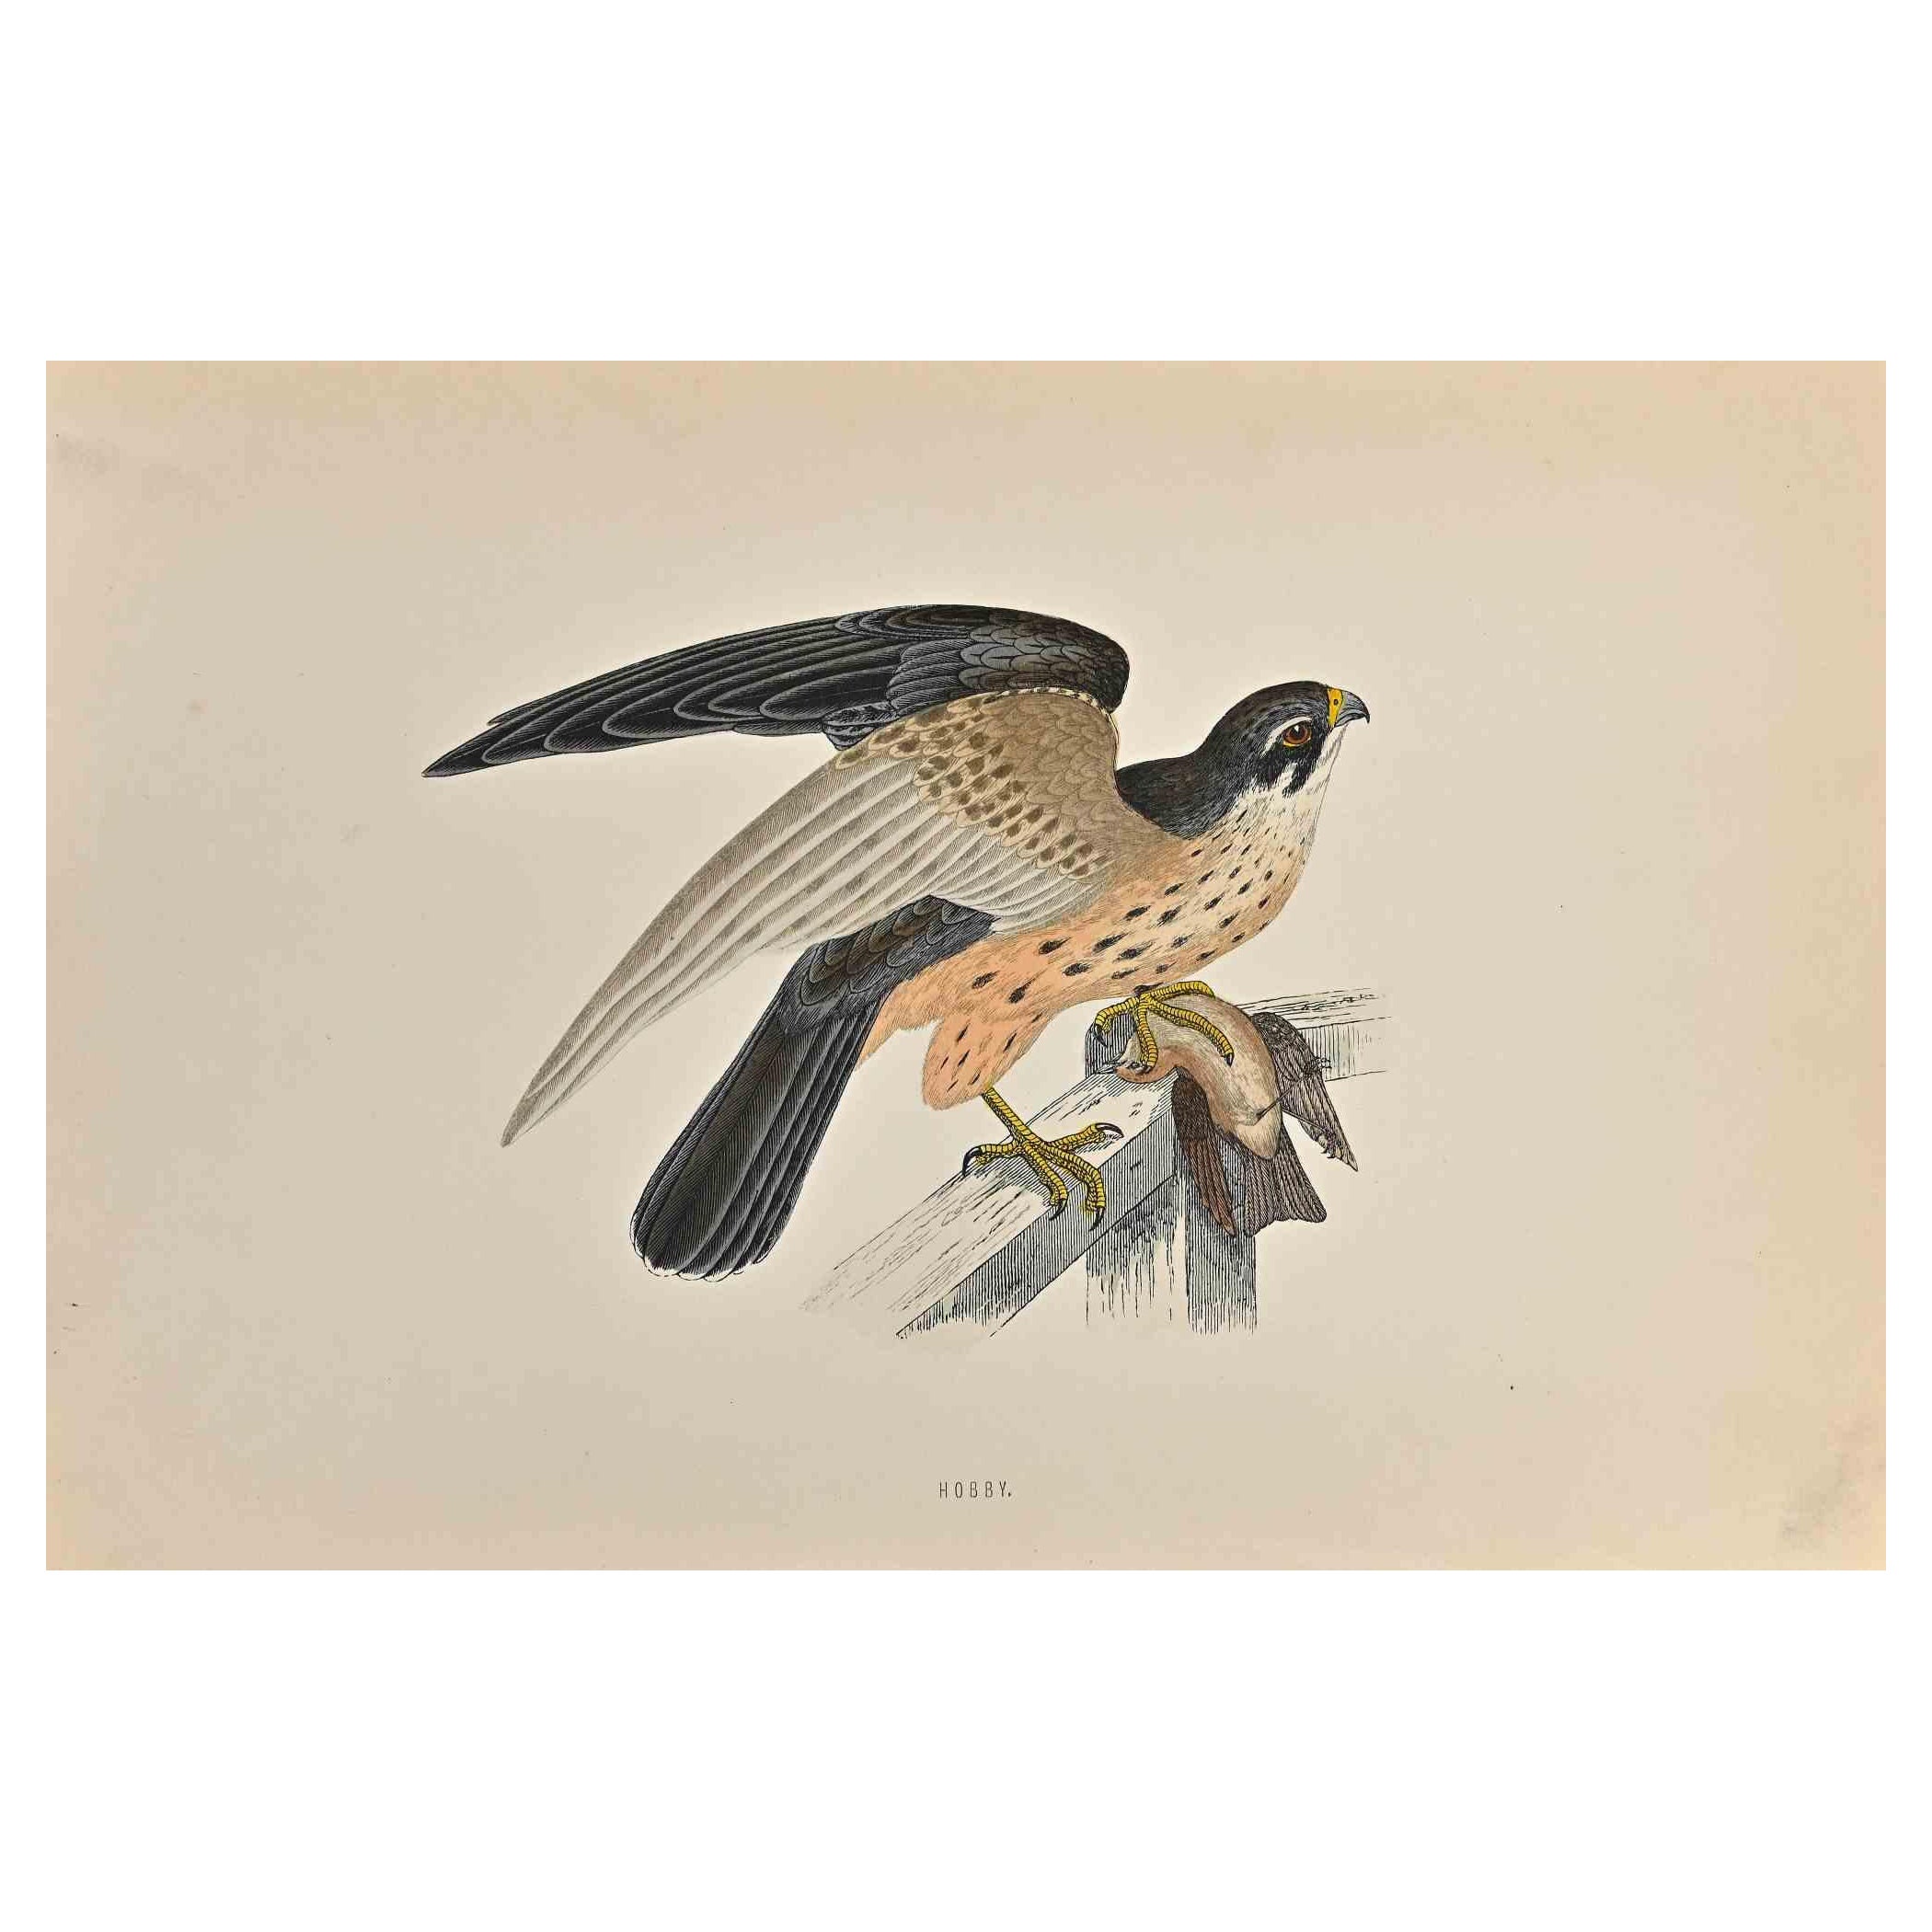 Hobby is a modern artwork realized in 1870 by the British artist Alexander Francis Lydon (1836-1917) . 

Woodcut print, hand colored, published by London, Bell & Sons, 1870.  Name of the bird printed in plate. This work is part of a print suite